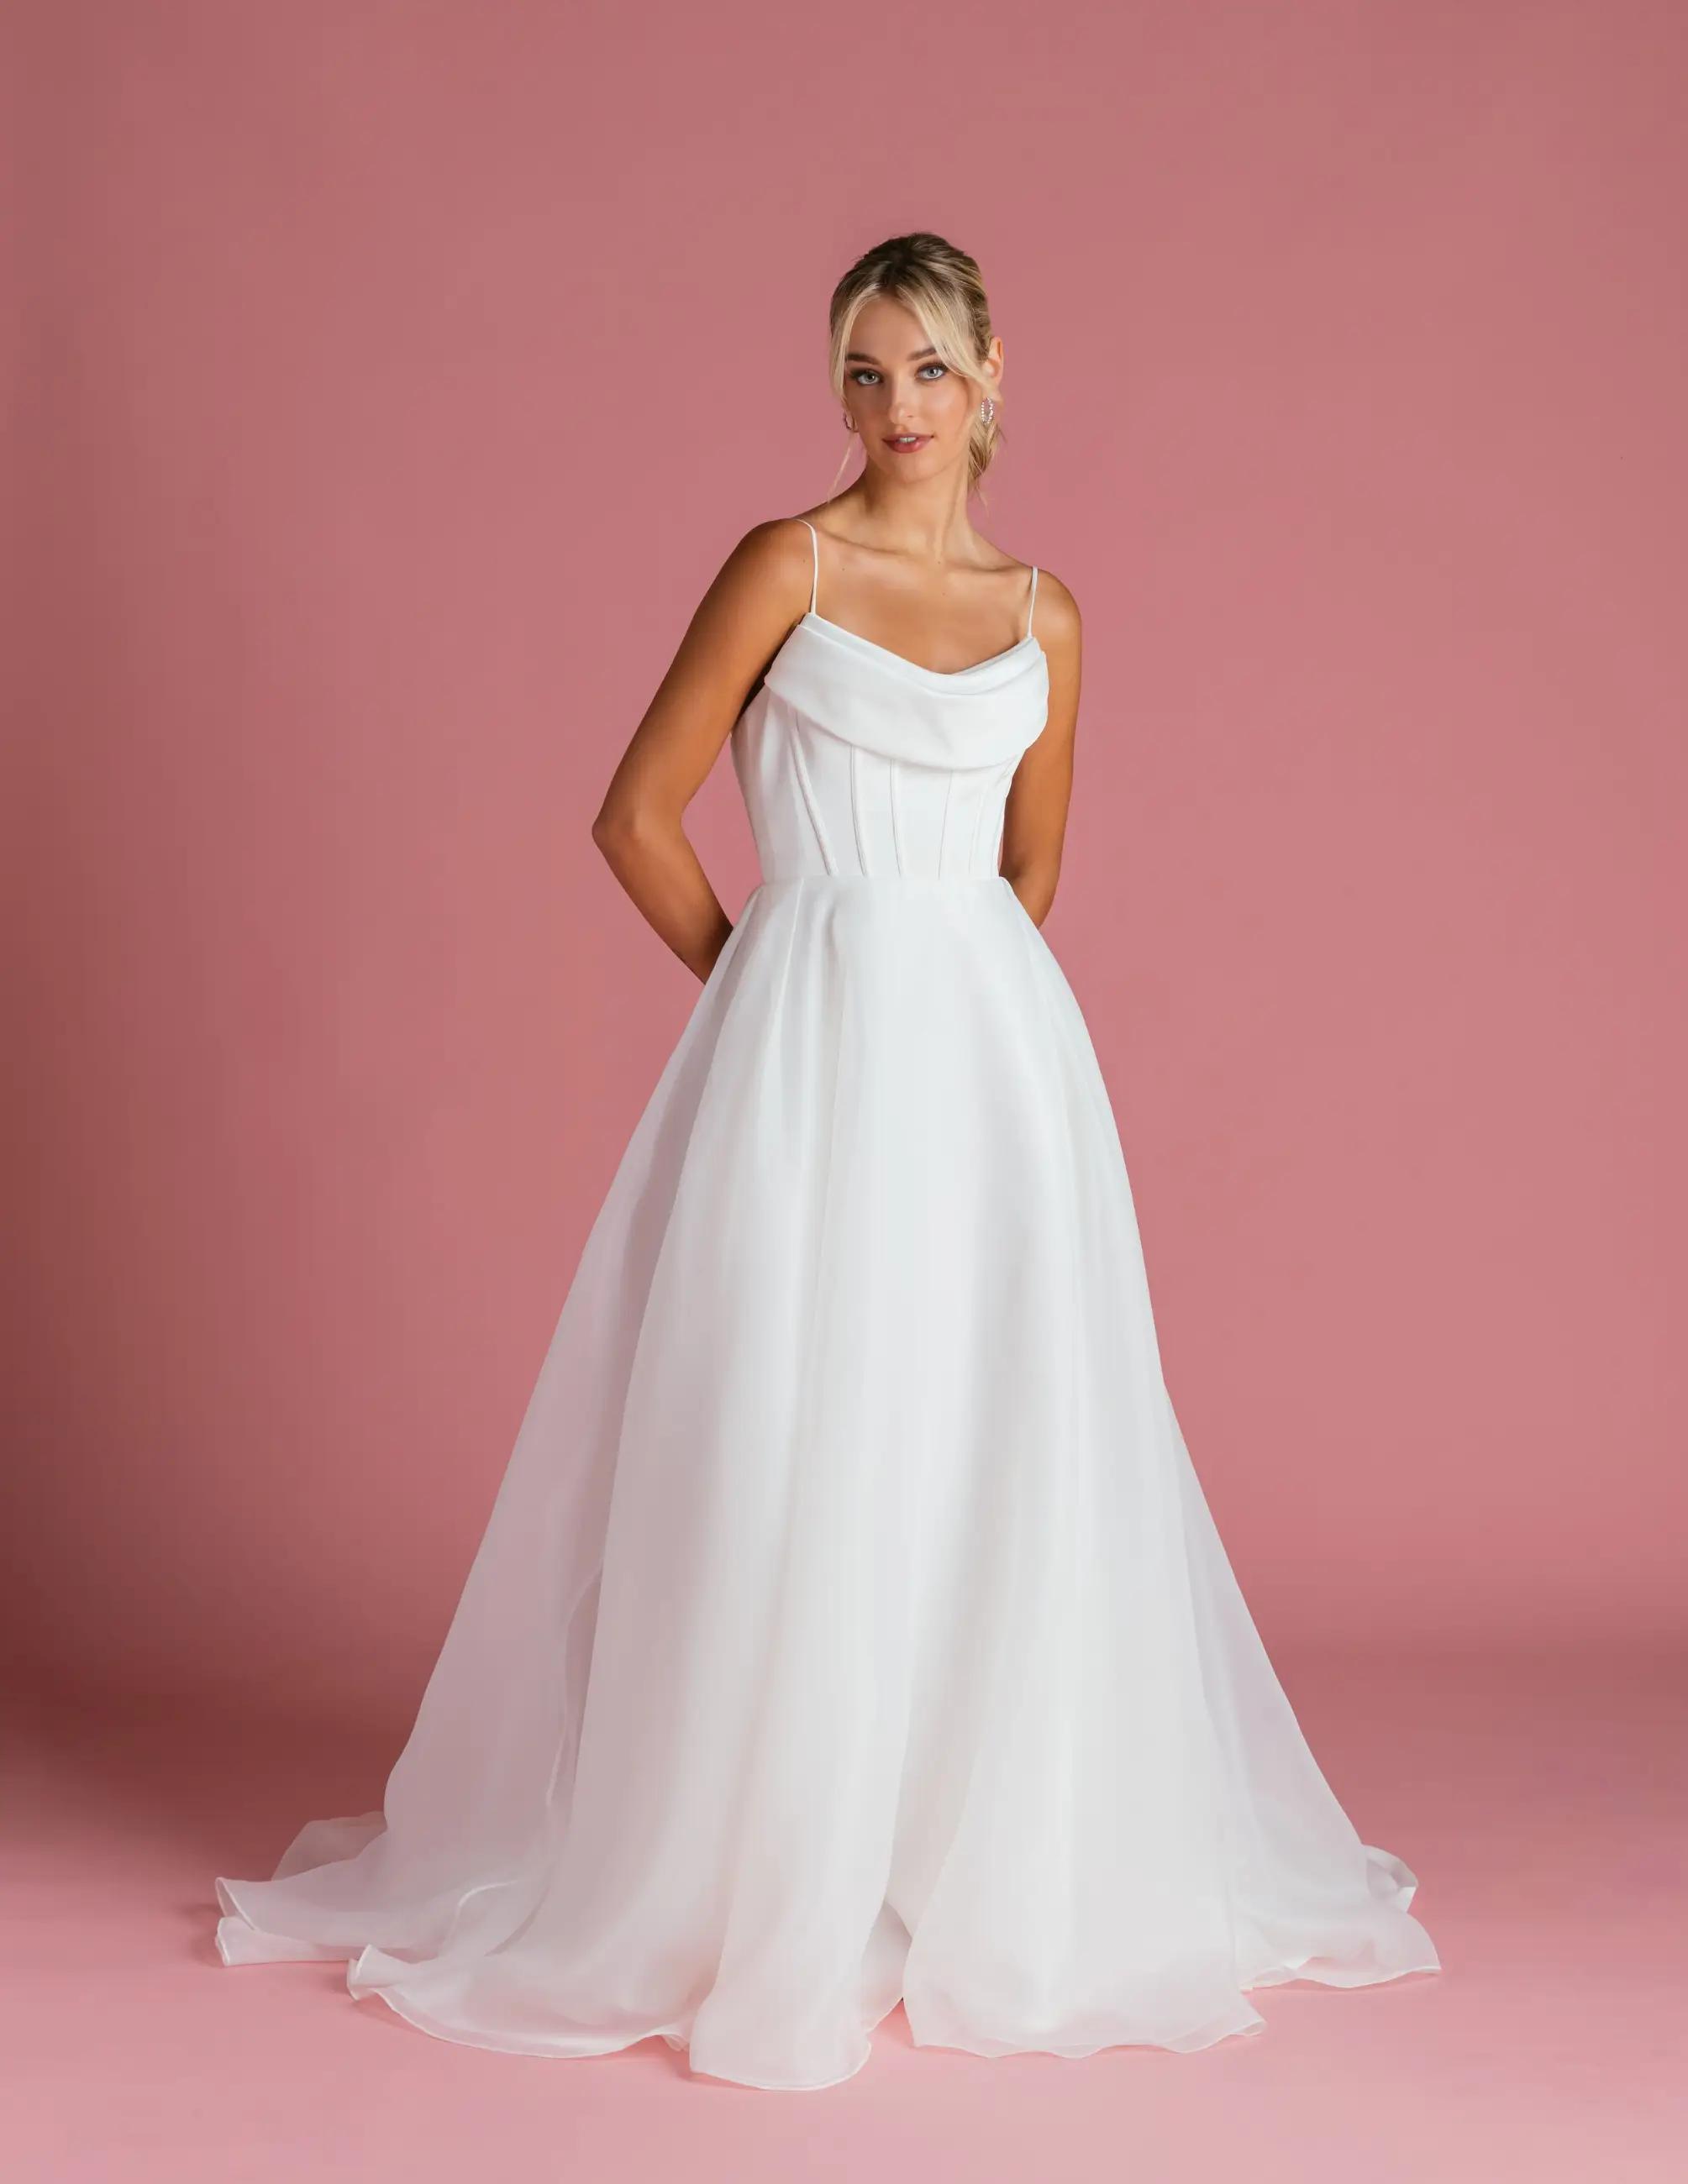 Bridal Gown Trends for the Minimalist Bride: Embrace Elegance with Simplicity Image